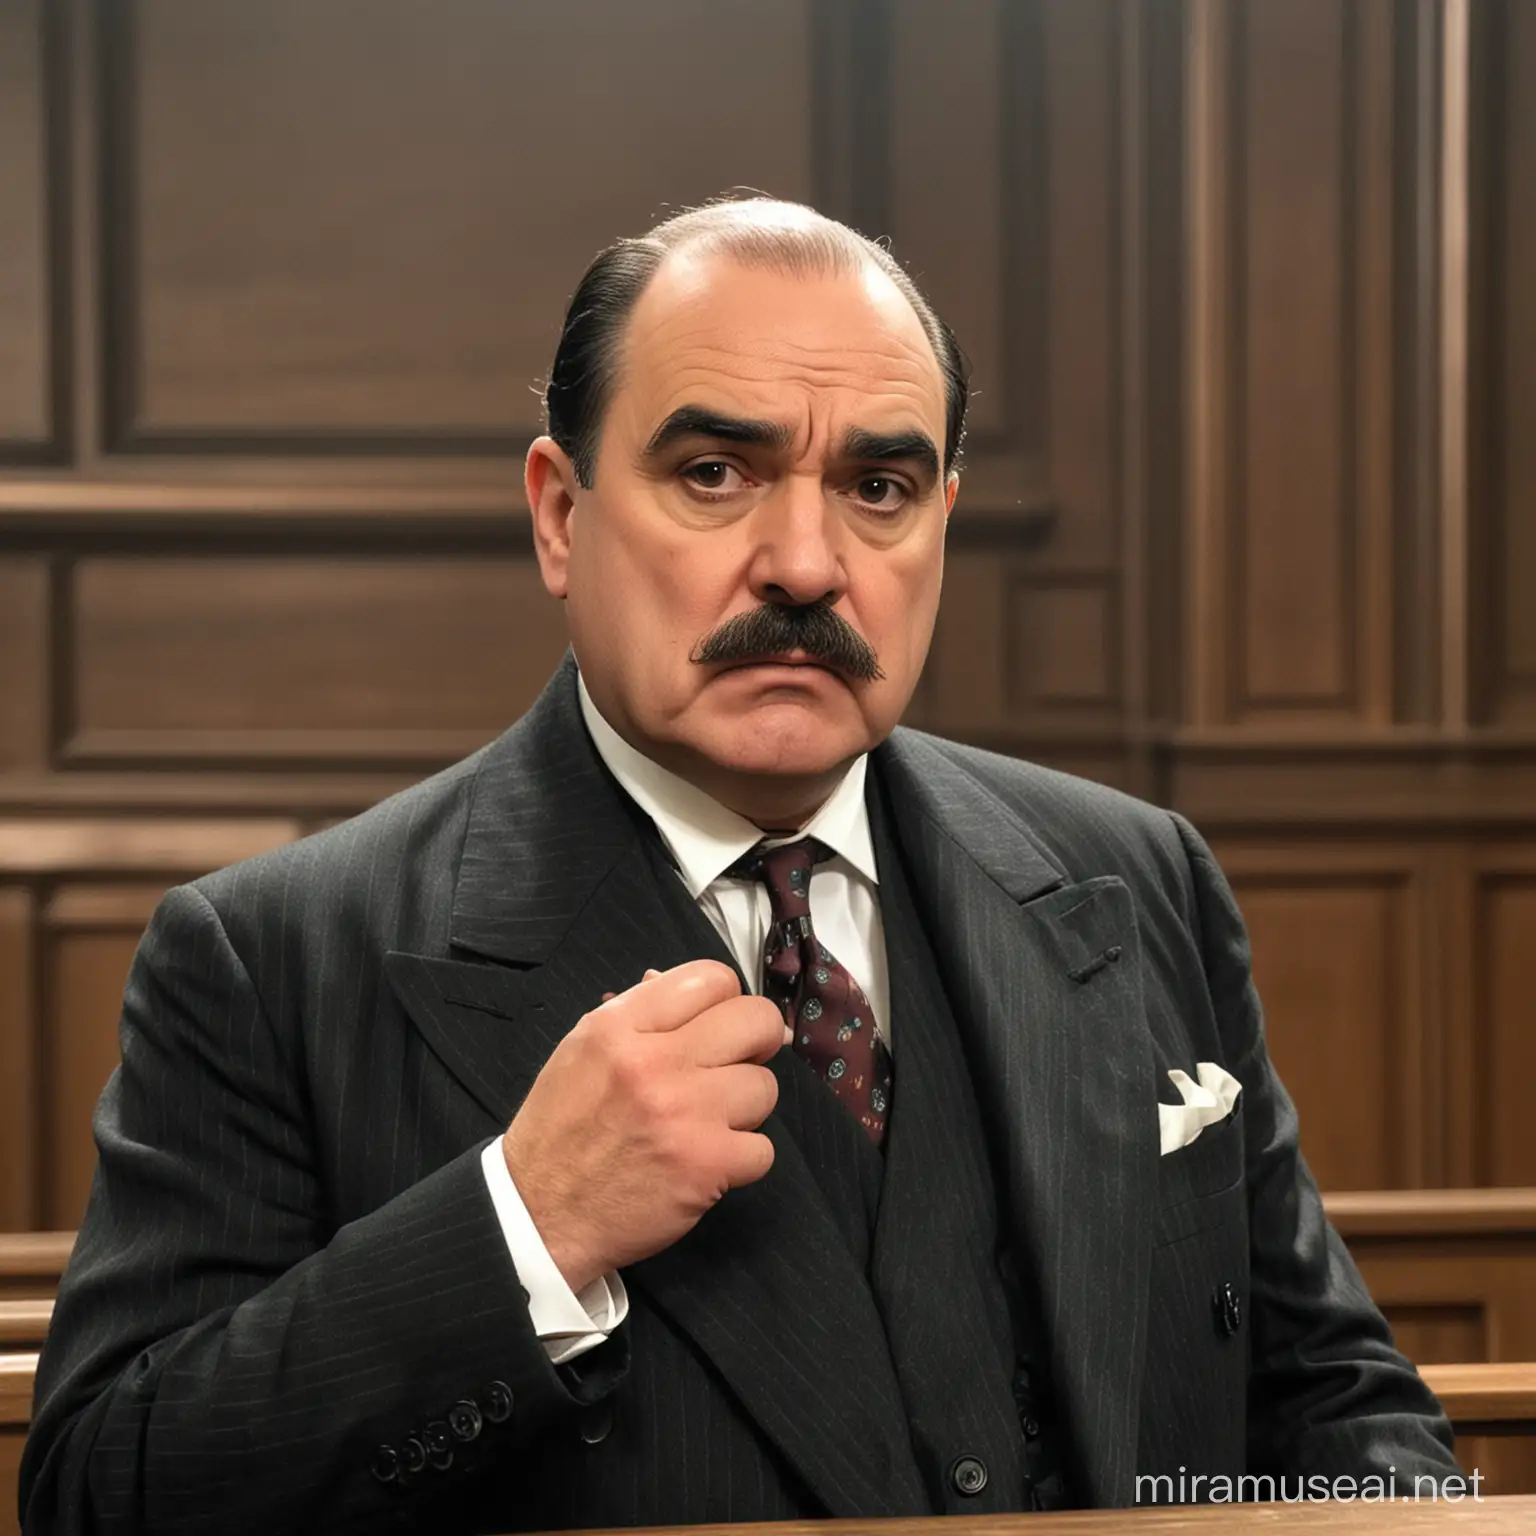 Mournful Inspector Poirot in a Courtroom Setting